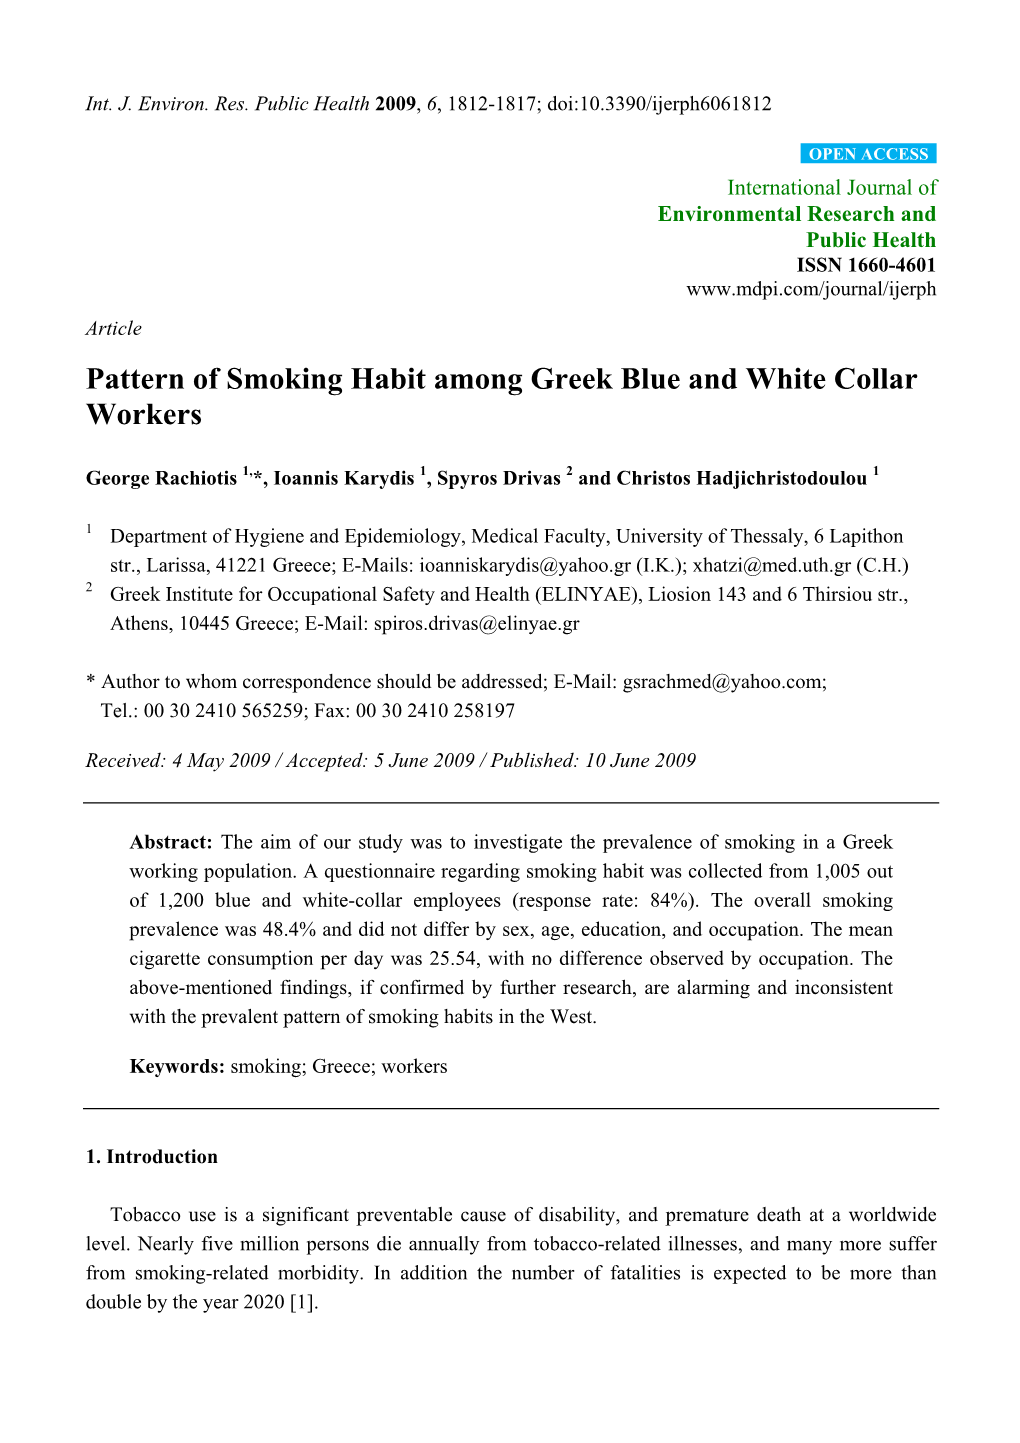 Pattern of Smoking Habit Among Greek Blue and White Collar Workers